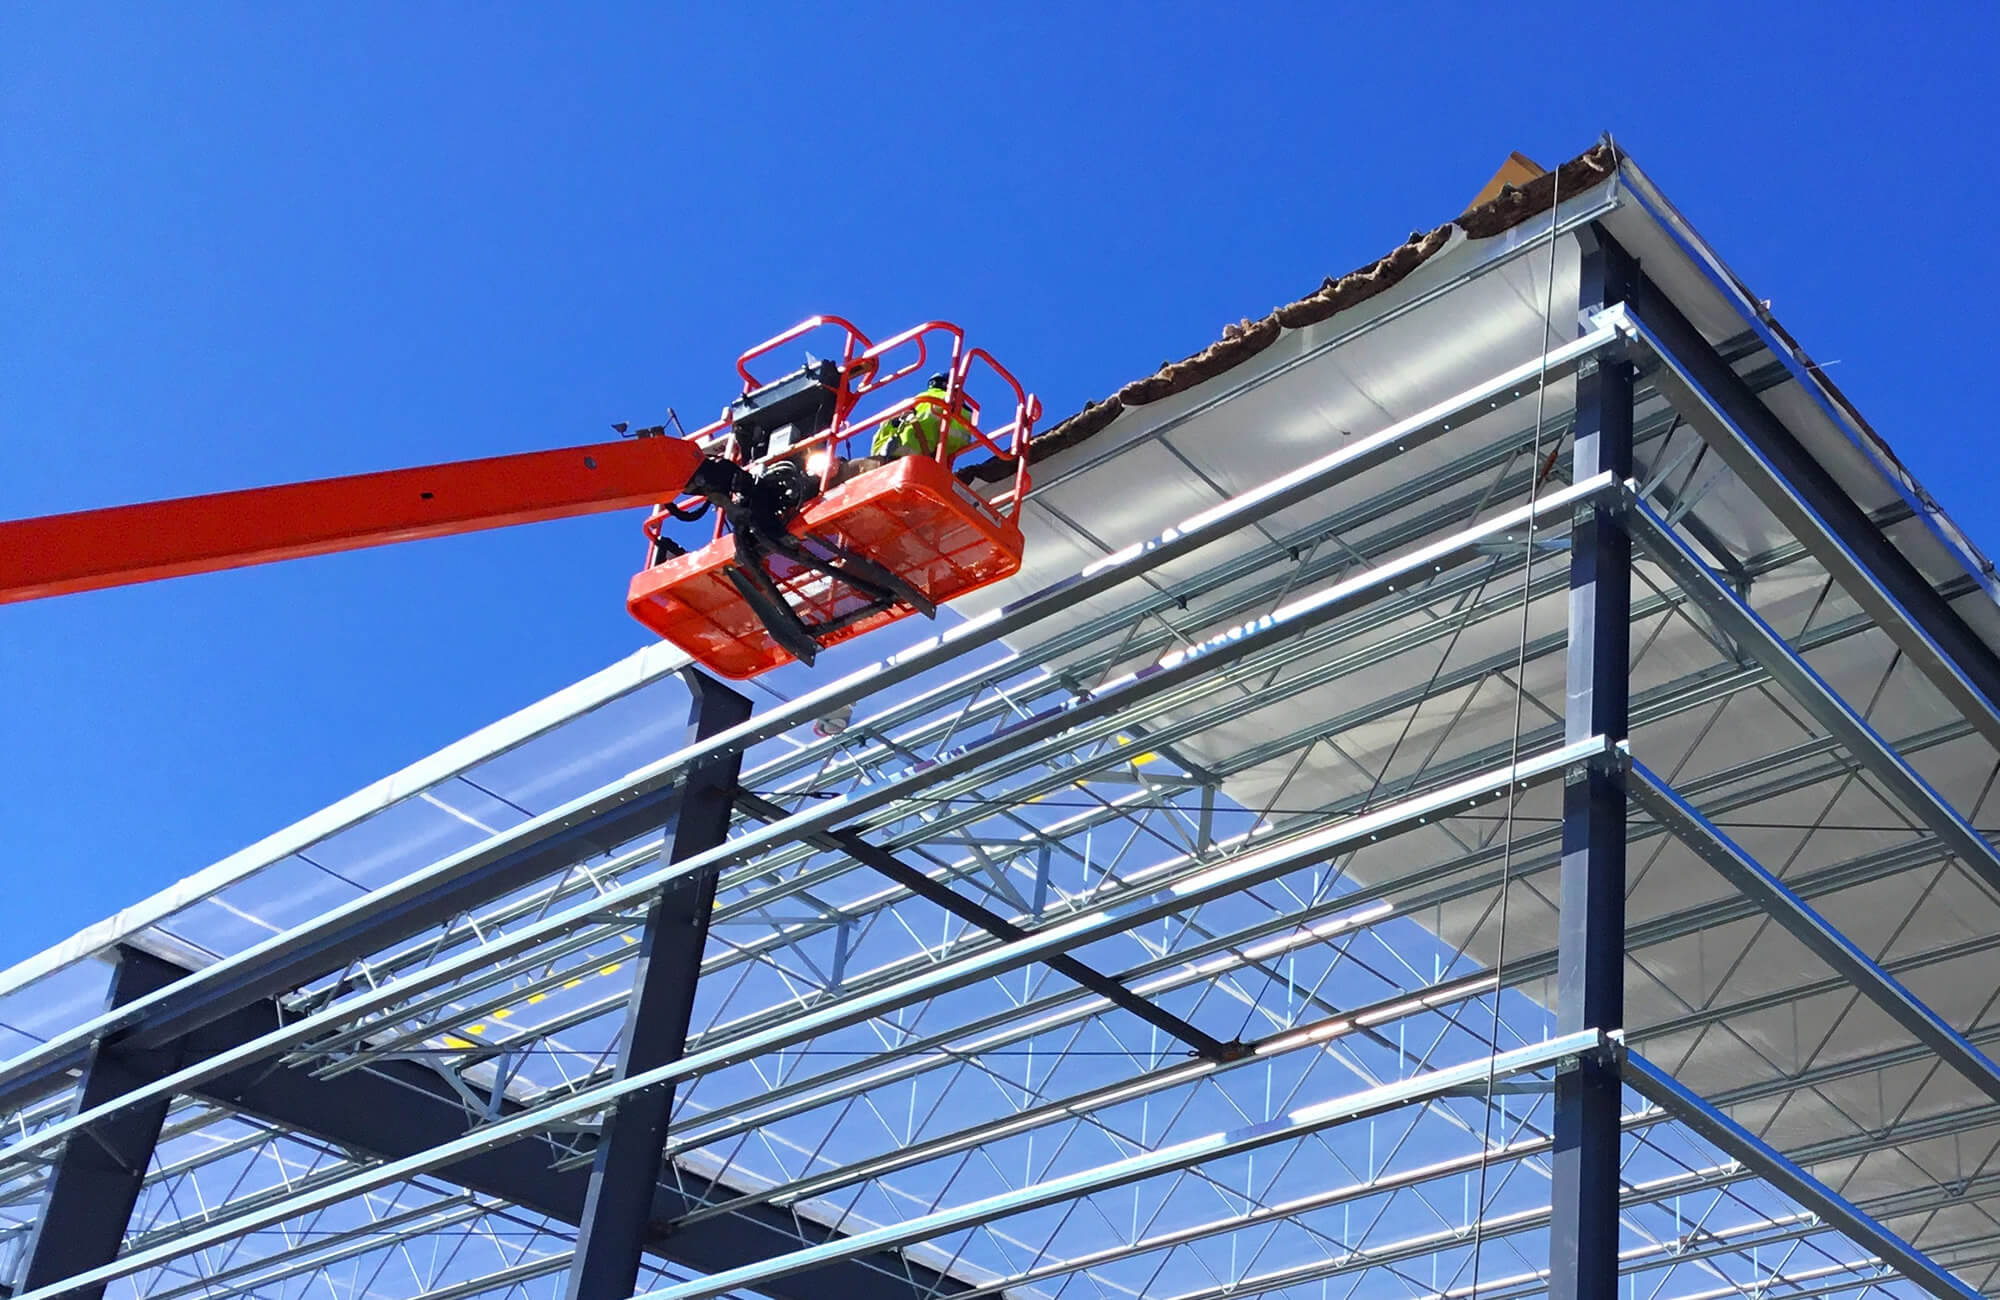 Sheridan Construction employee in a Boom lift, working on the installation of a metal roofing system.